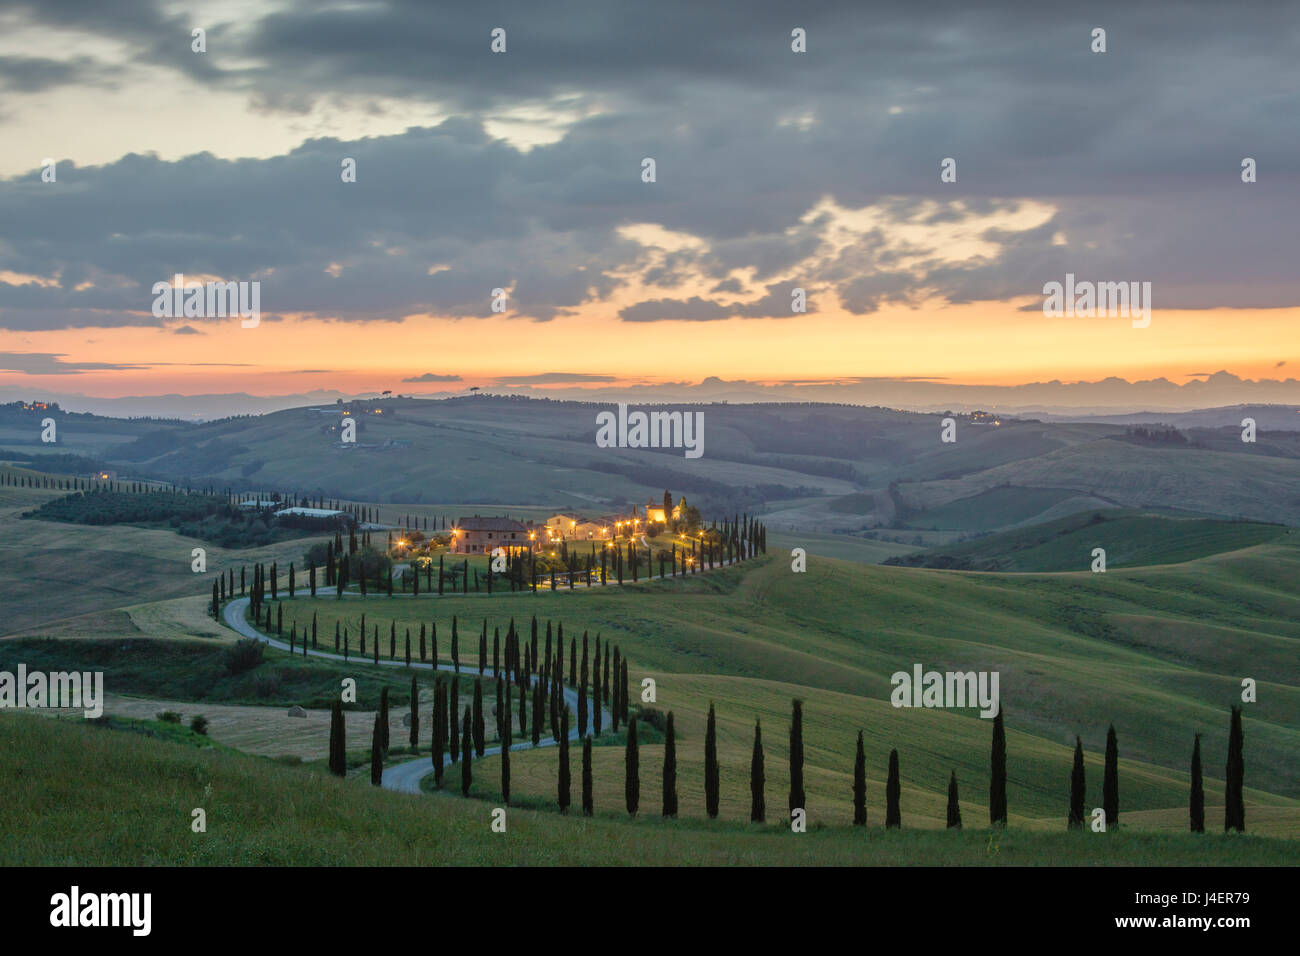 Dusk on green hills surrounded by cypresses and farm houses, Crete Senesi (Senese Clays), province of Siena, Tuscany, Italy Stock Photo